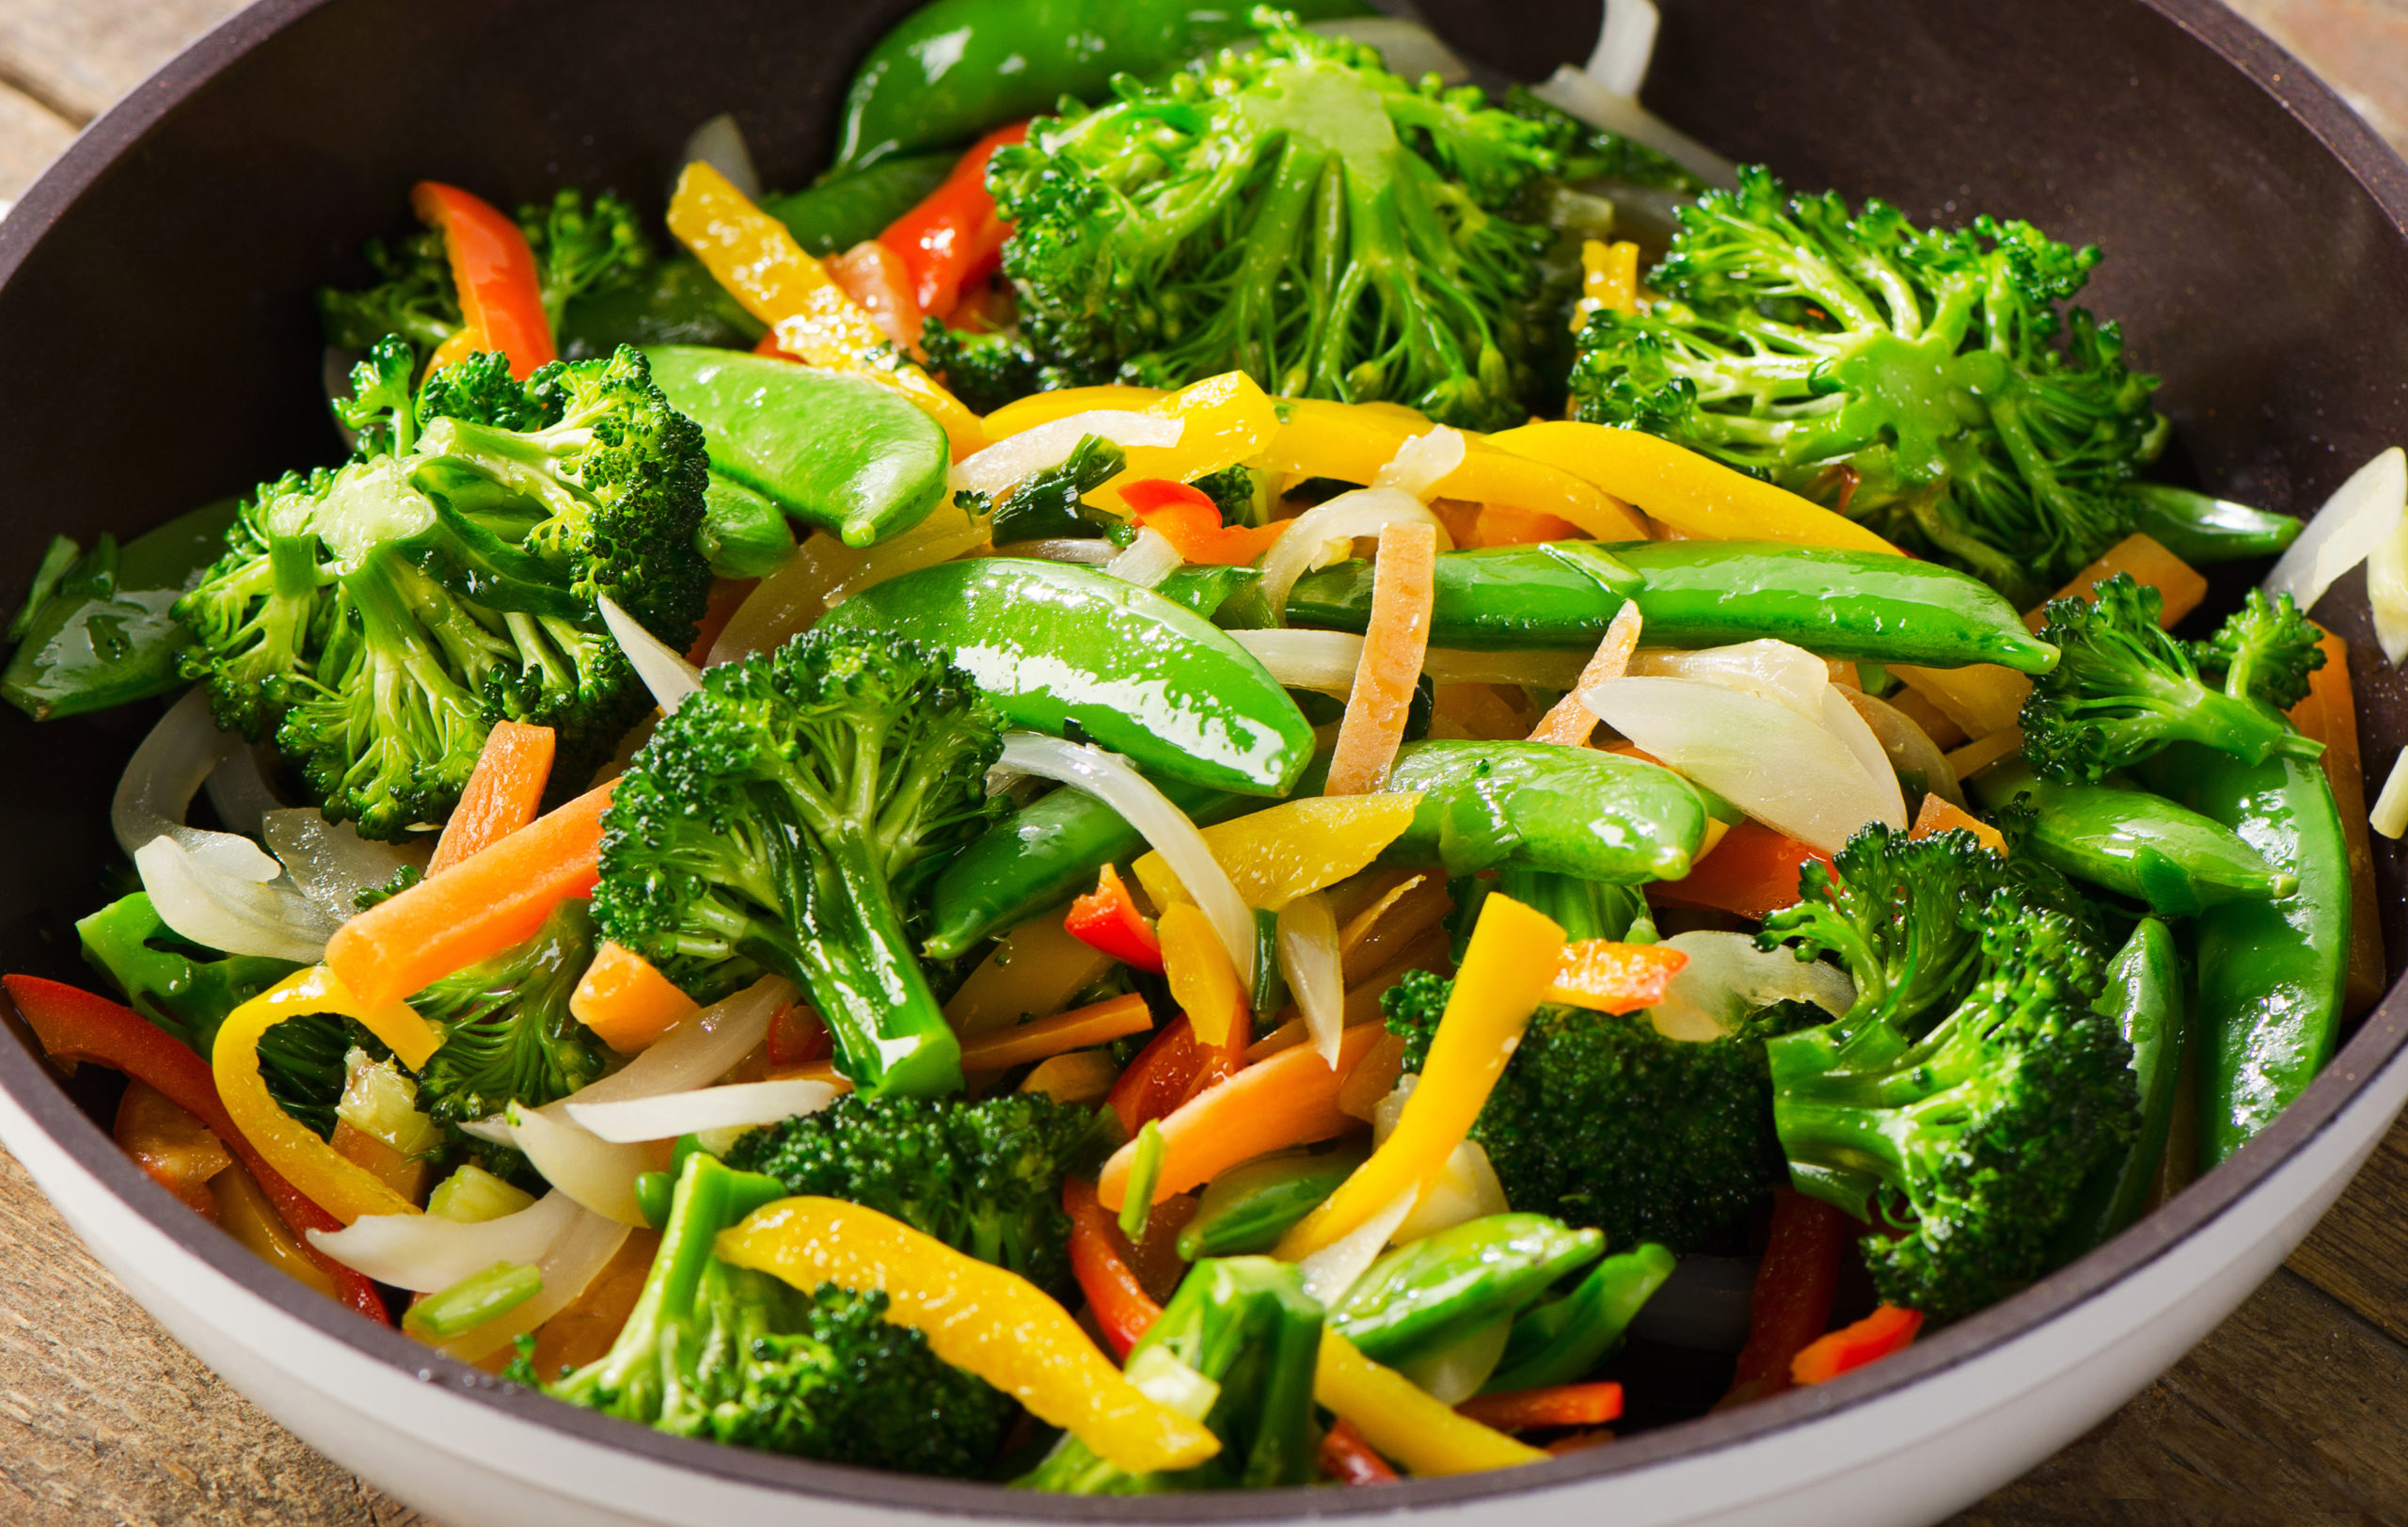 Vegetable Stir Fry is a tasty lunch